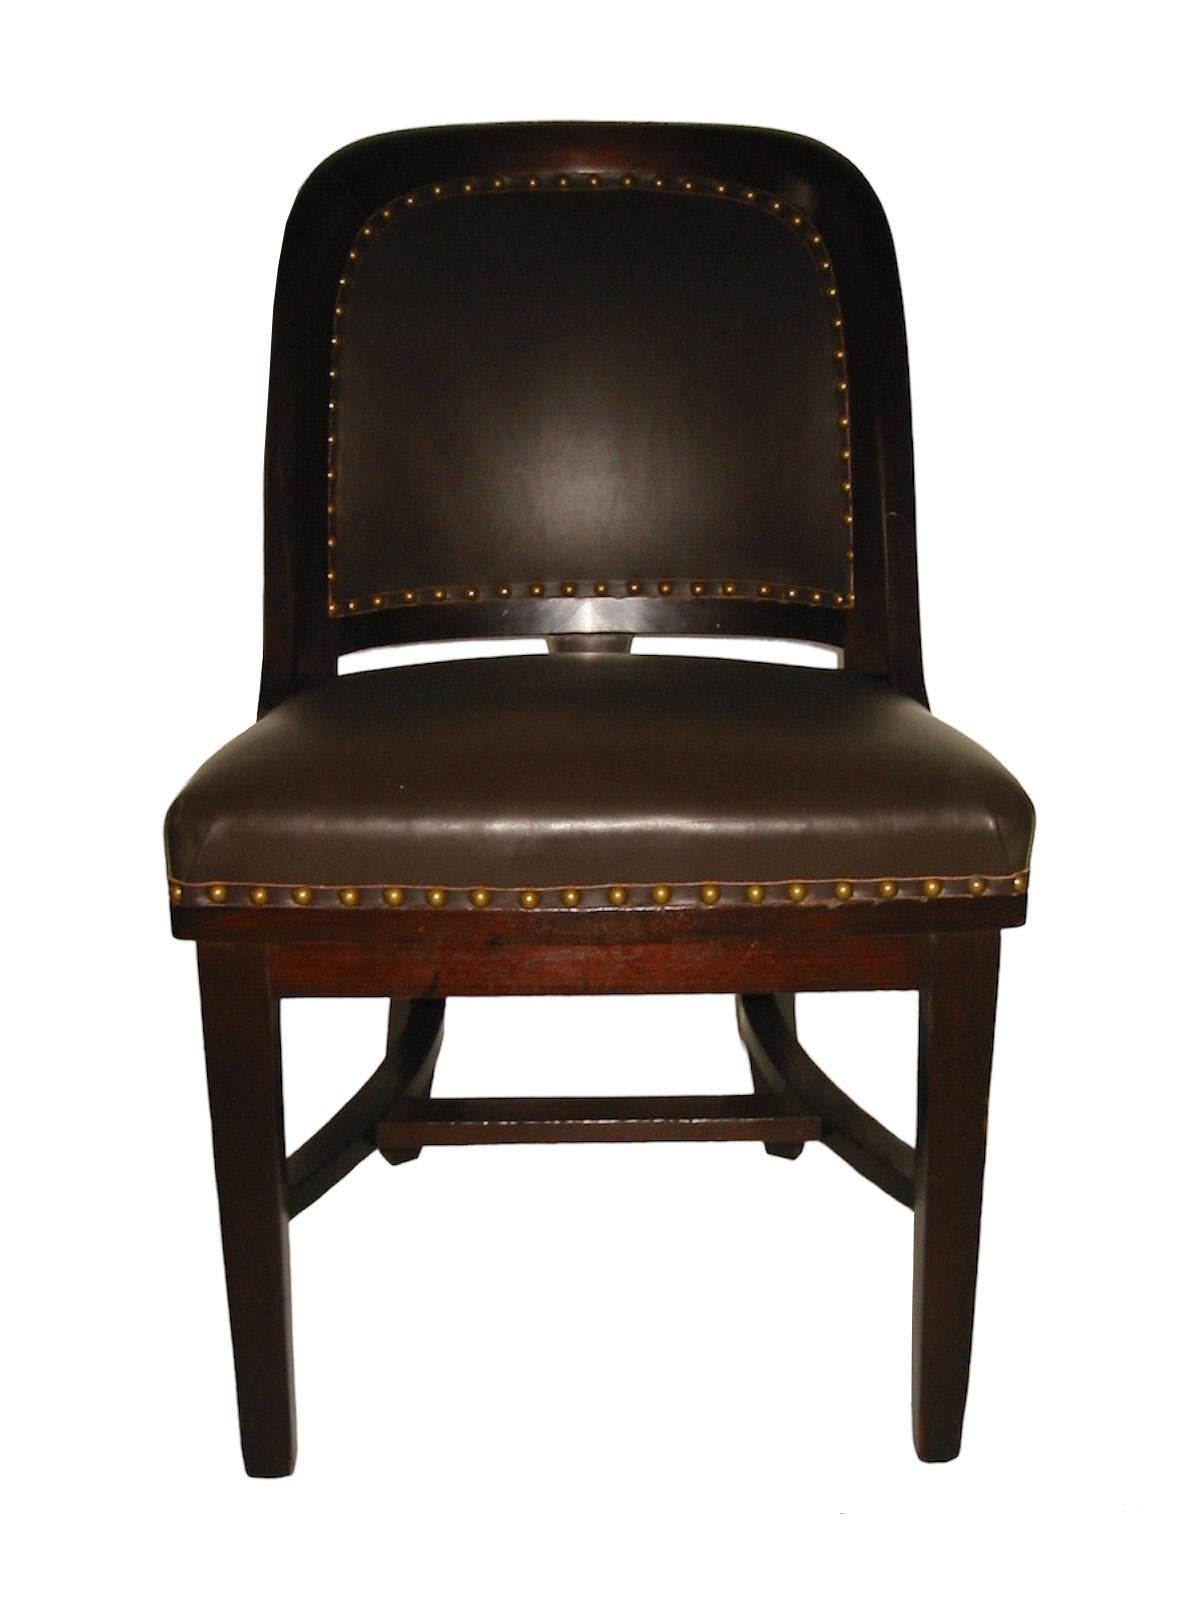 19th Century Leather Bank Chair - Original Upholstery For Sale 1